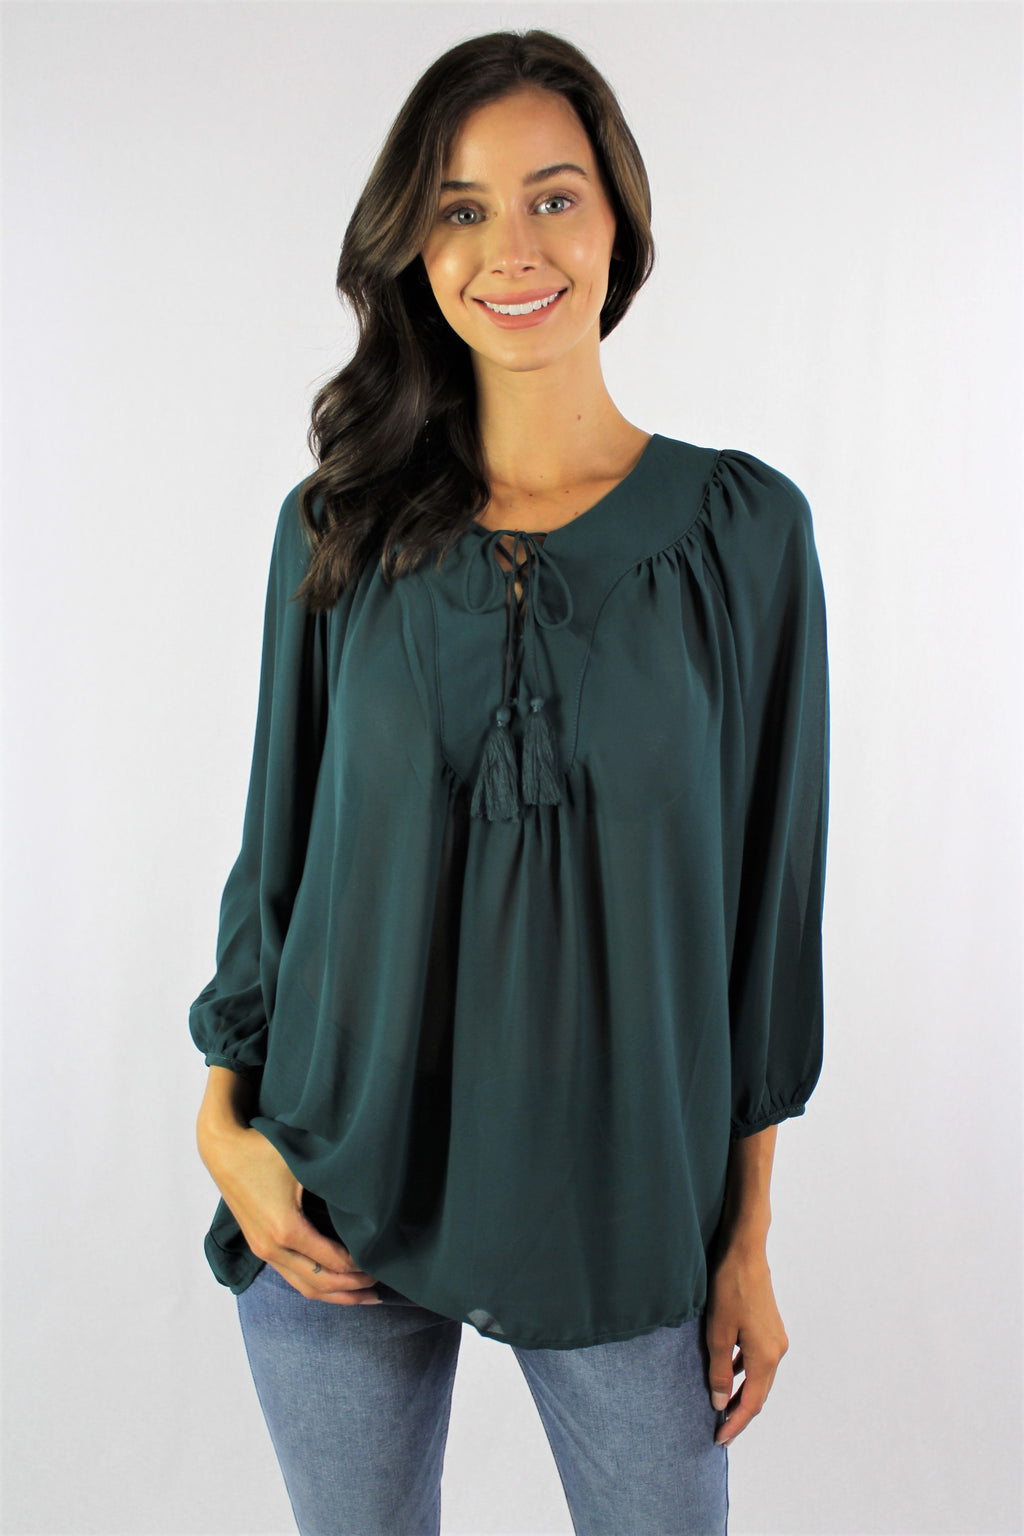 Wholesale Clothing: Women’s Clothes for Boutiques - Good Stuff Apparel